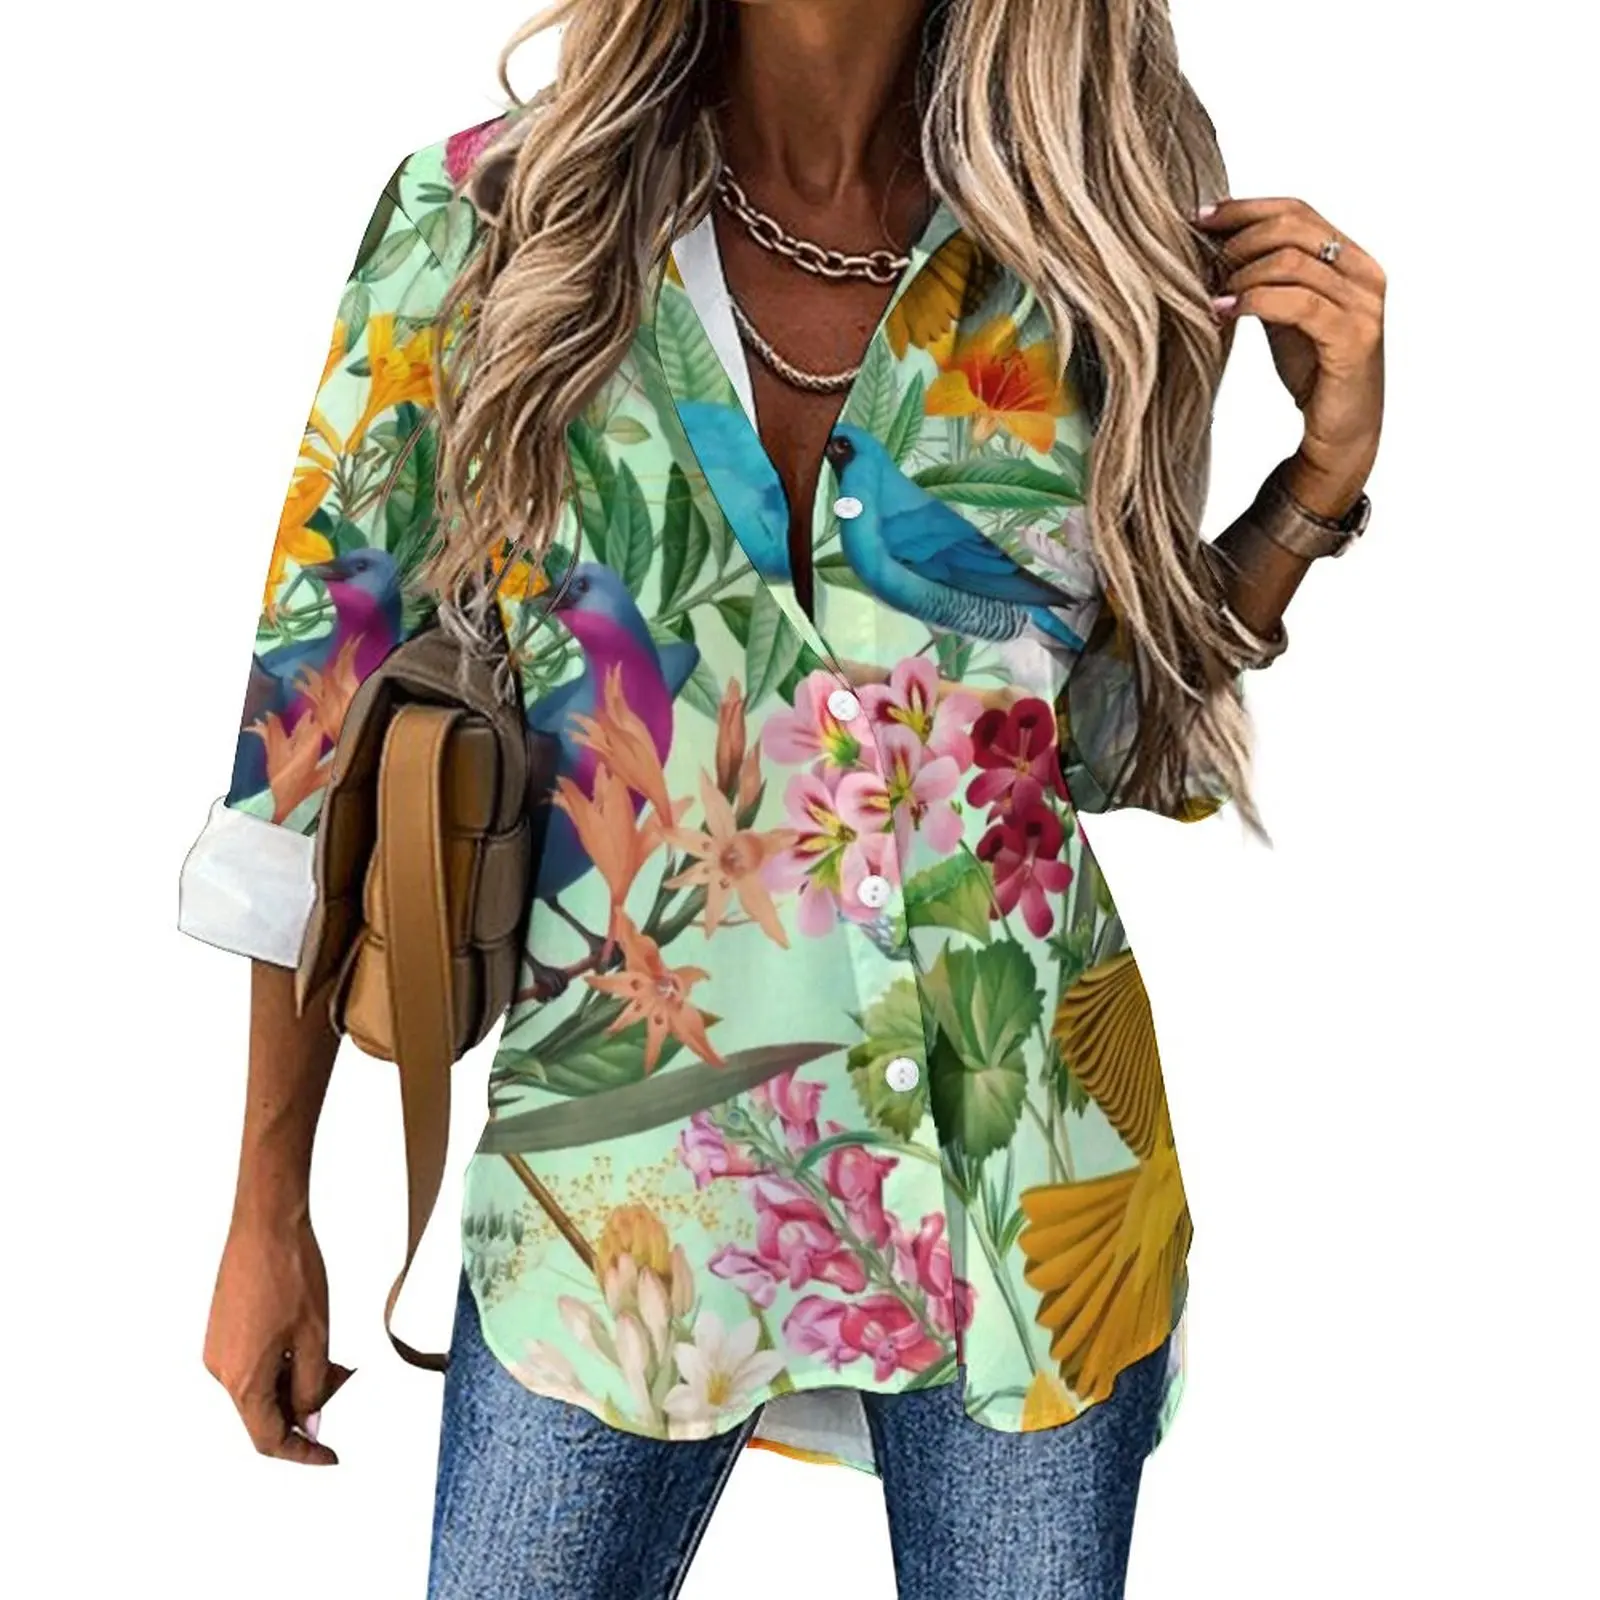 

Birds Print Blouse Tropical Paradise Floral Vintage Design Casual Blouses Female Street Style Shirts Long-Sleeve Oversized Top